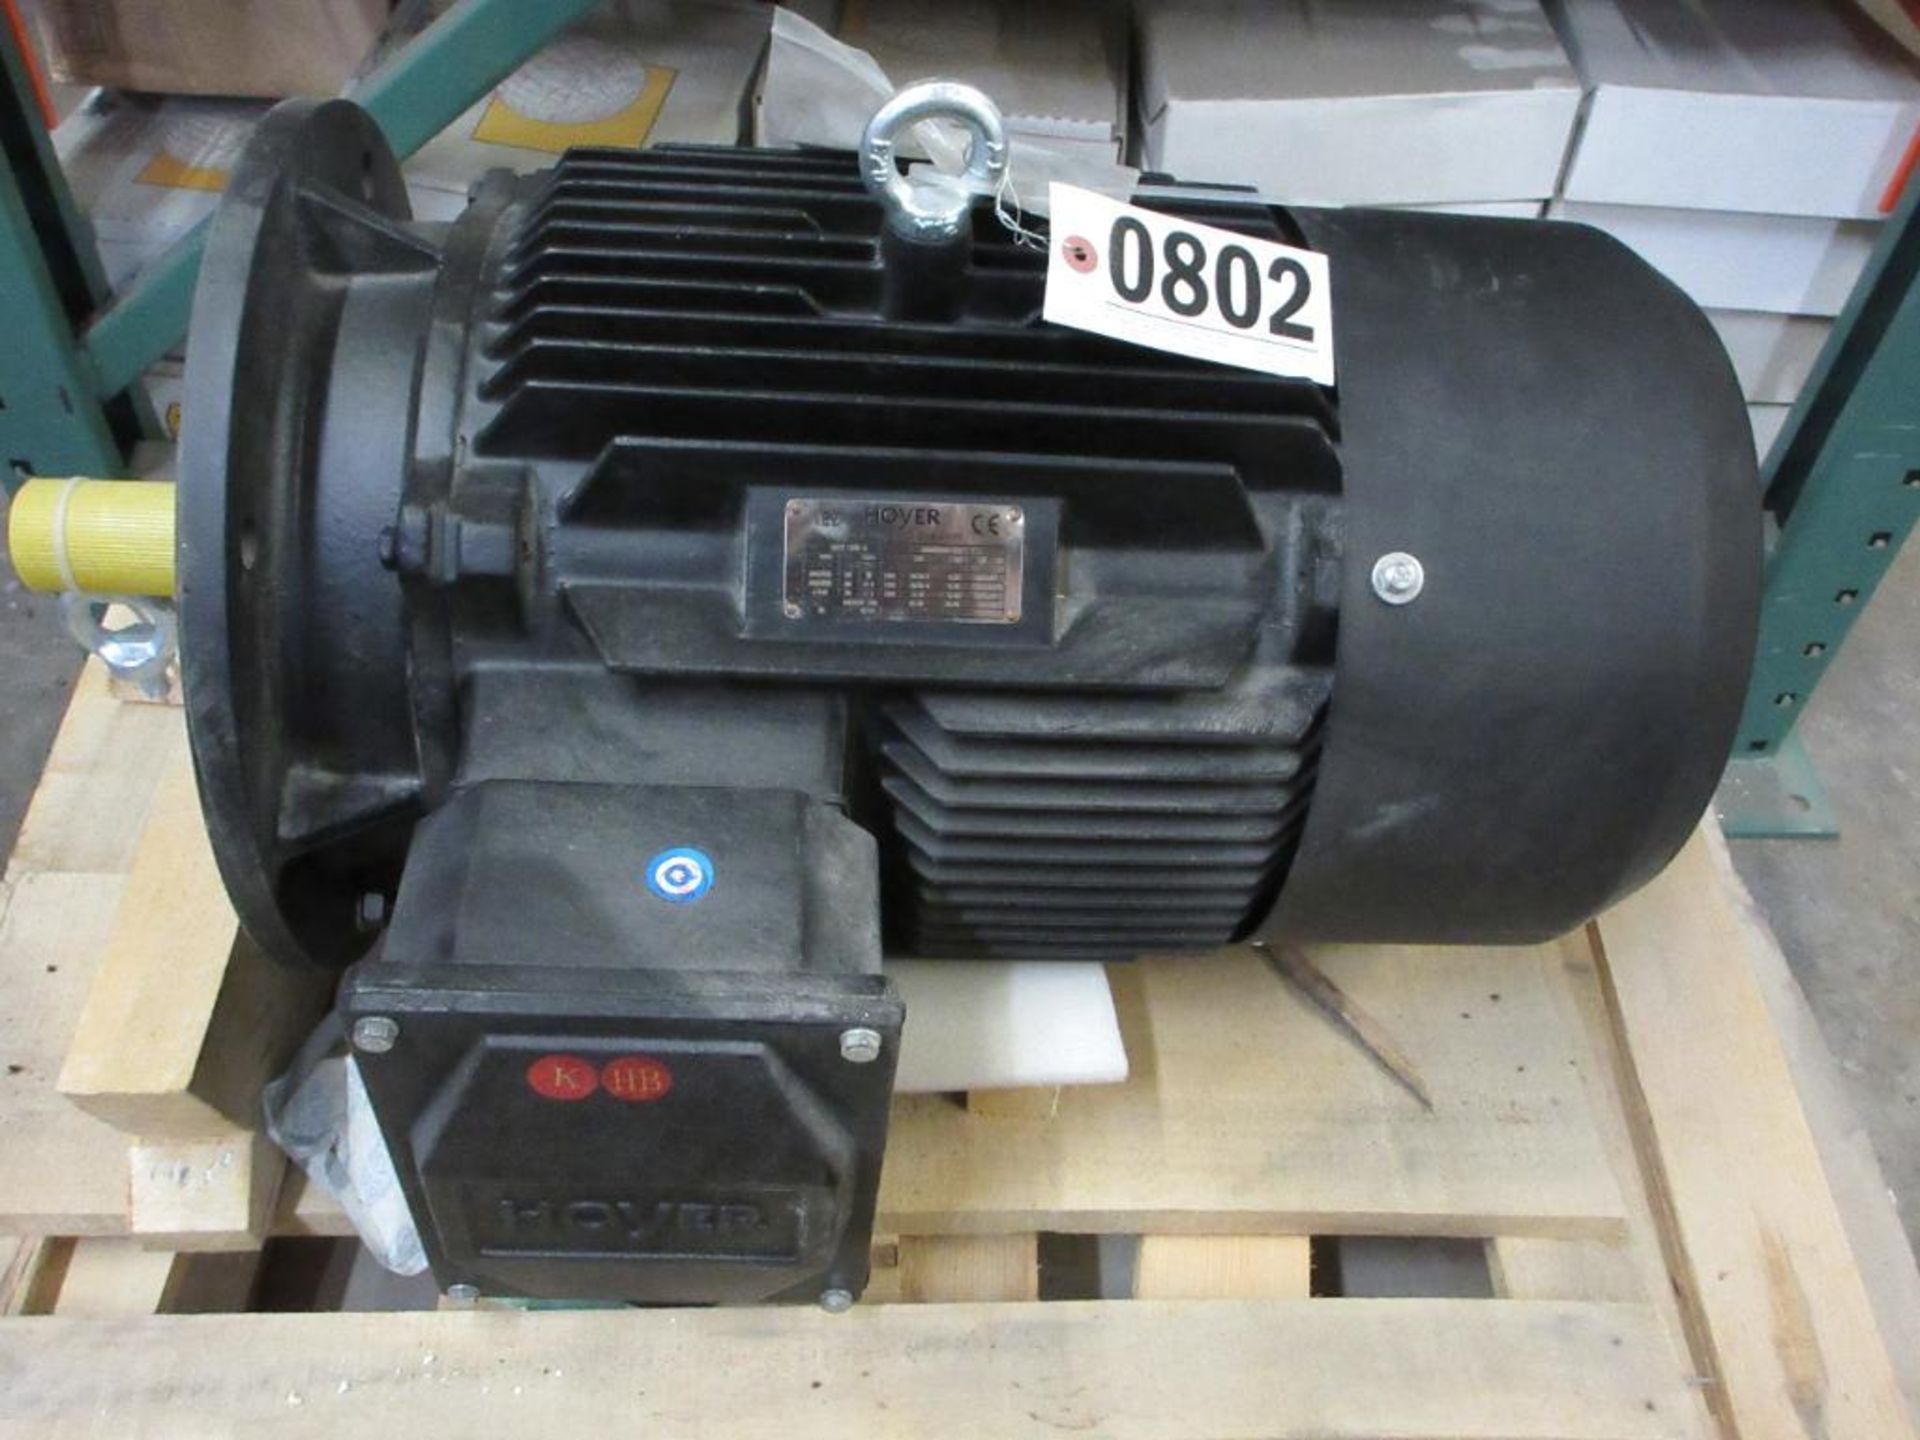 HOYER MOTORS HMC2 160L-4 15kW 1460RPM FRAME 56C 3 PHASE ELECTRIC MOTOR (THIS LOT IS FOB CAMARILLO CA